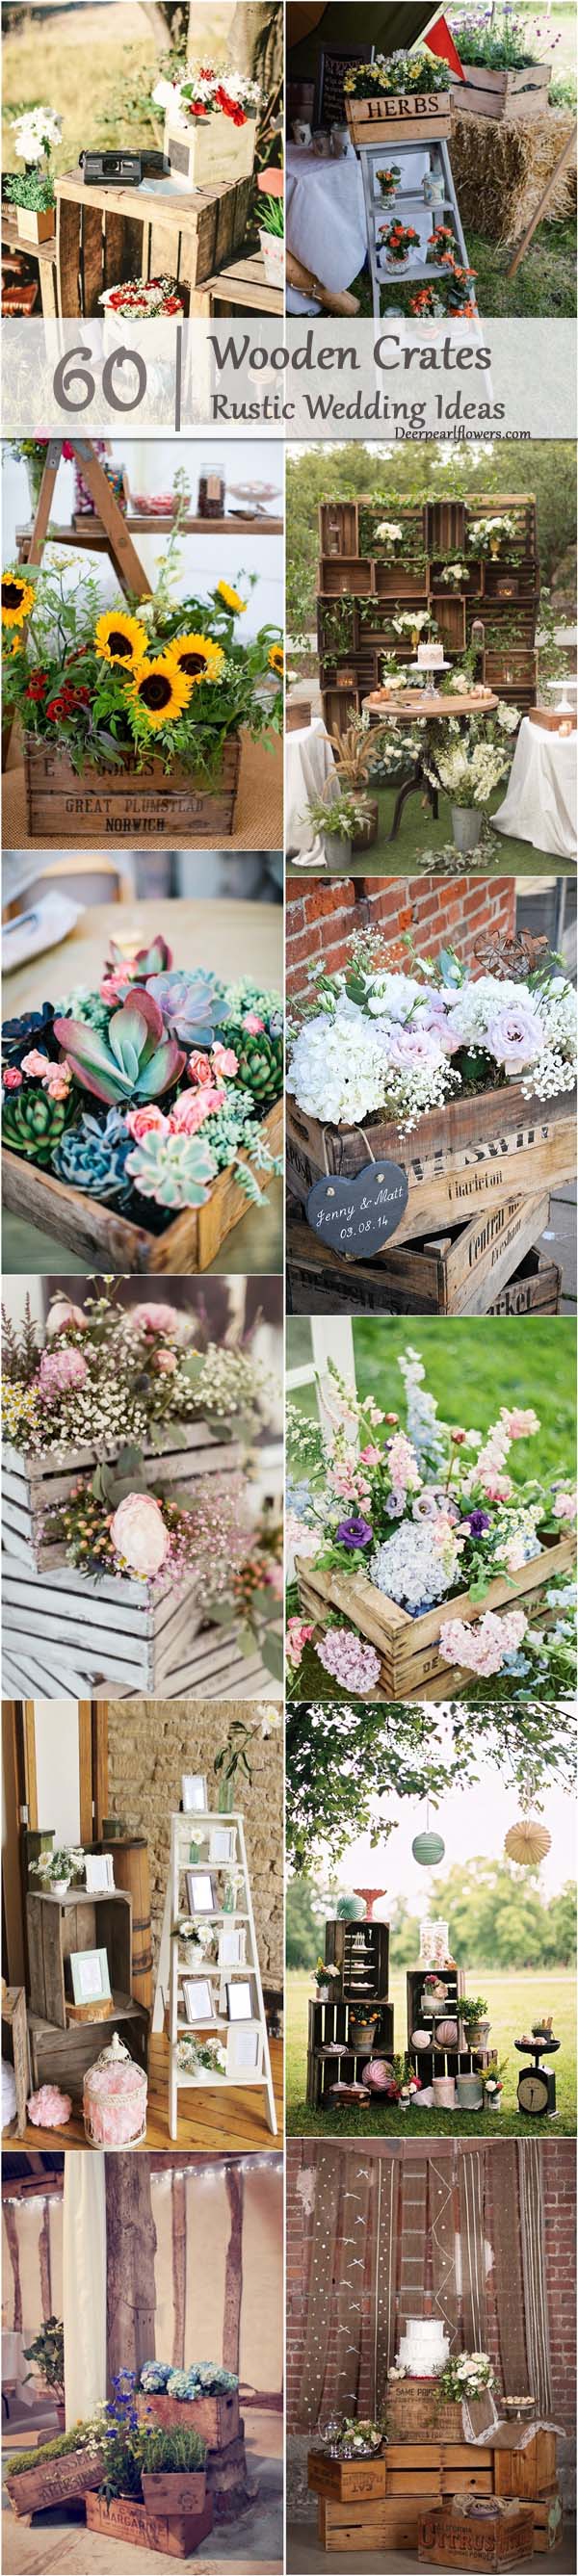 rustic country wooden crate wedding decor ideas